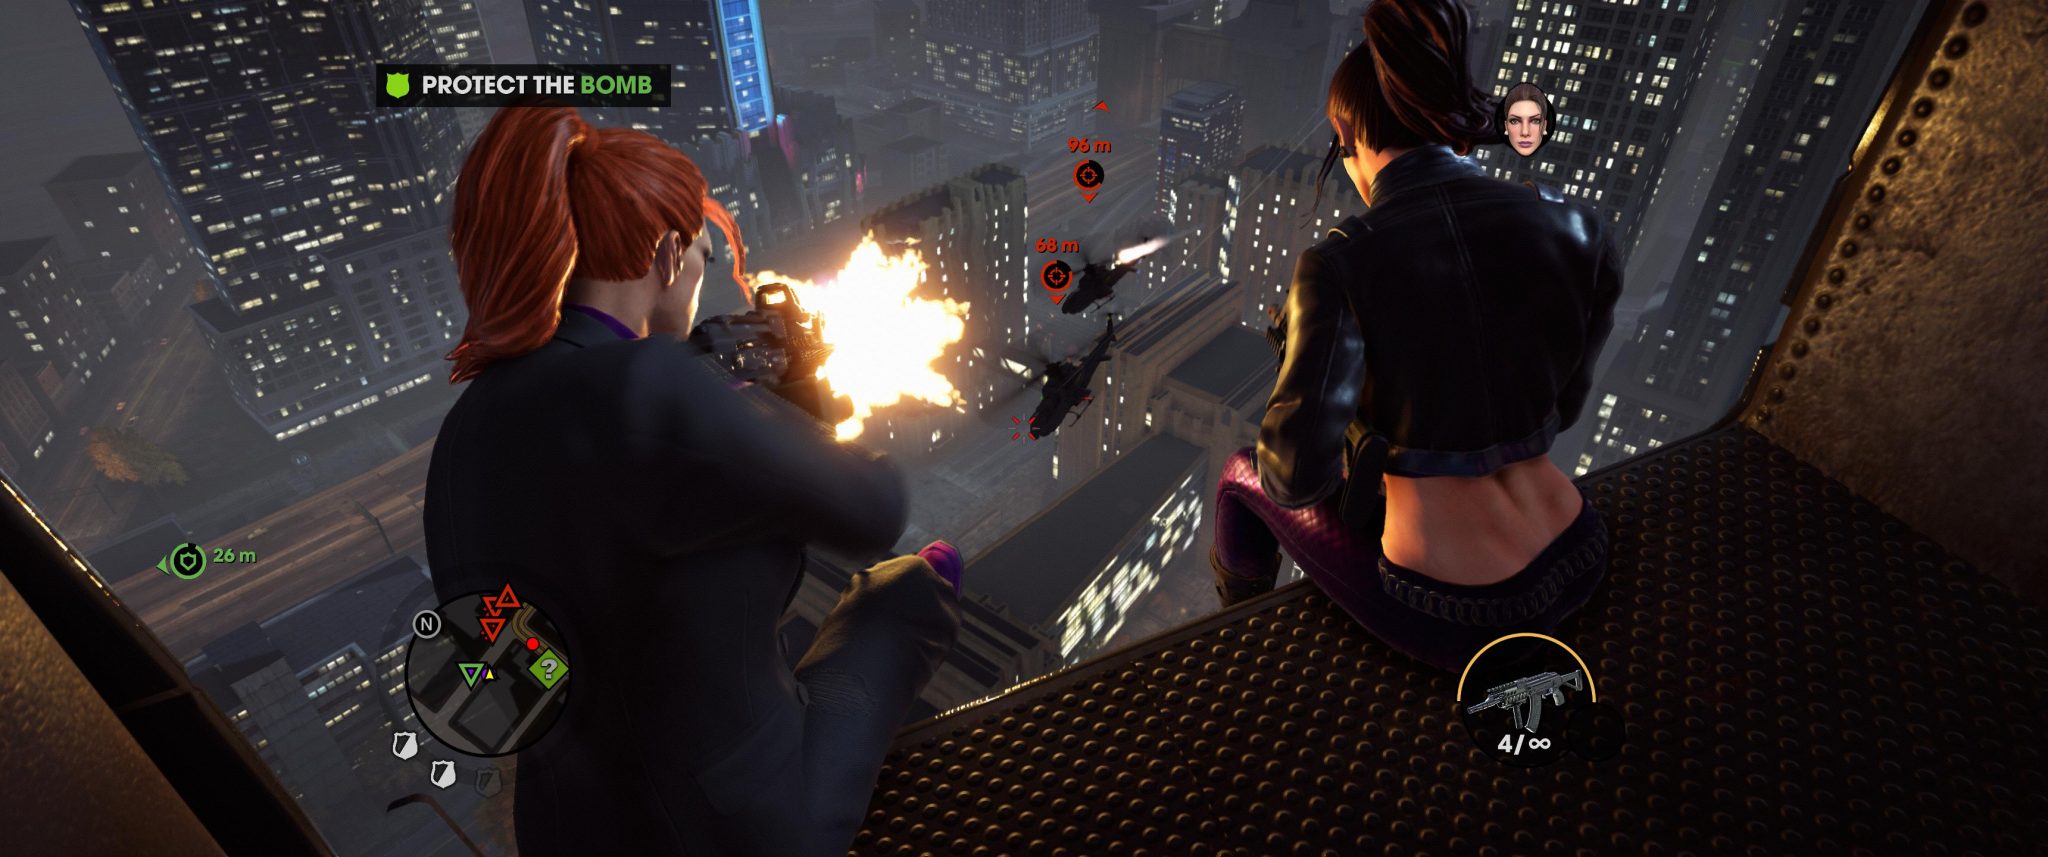 Saints Row: The Third Remastered Review – Still Awesome – WGB